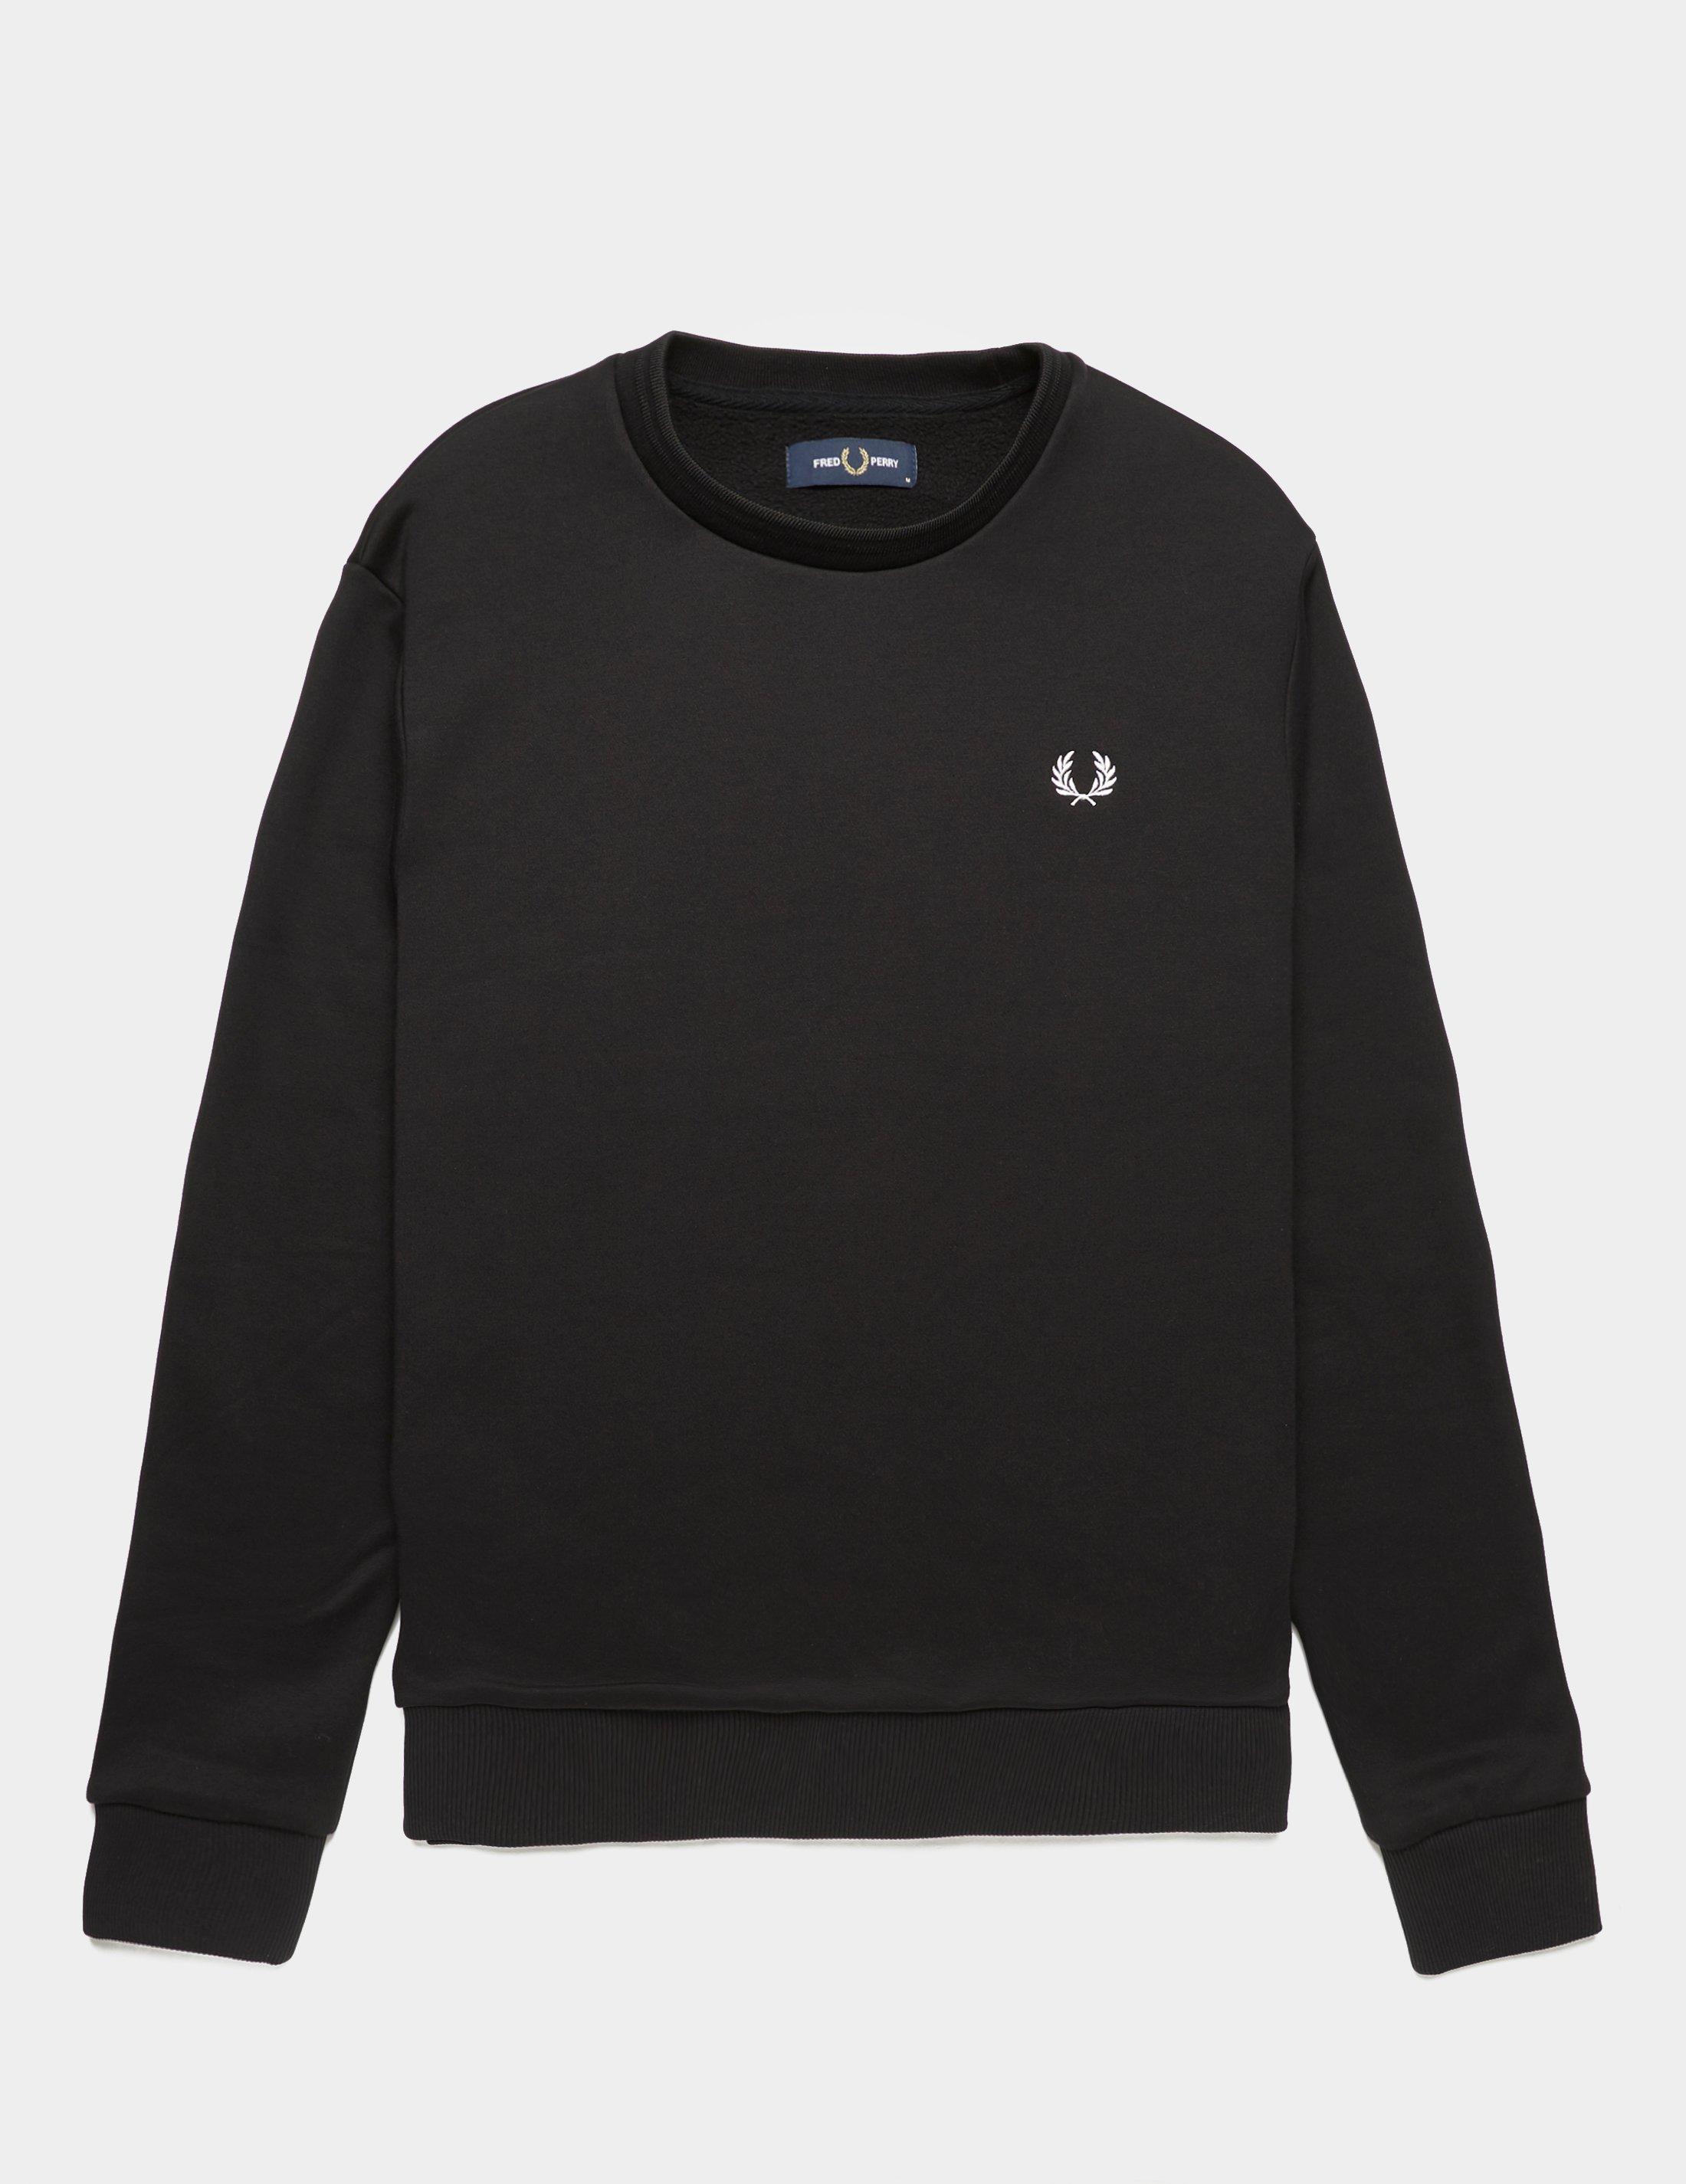 Fred Perry Cotton Back Print Sweatshirt Black for Men - Lyst